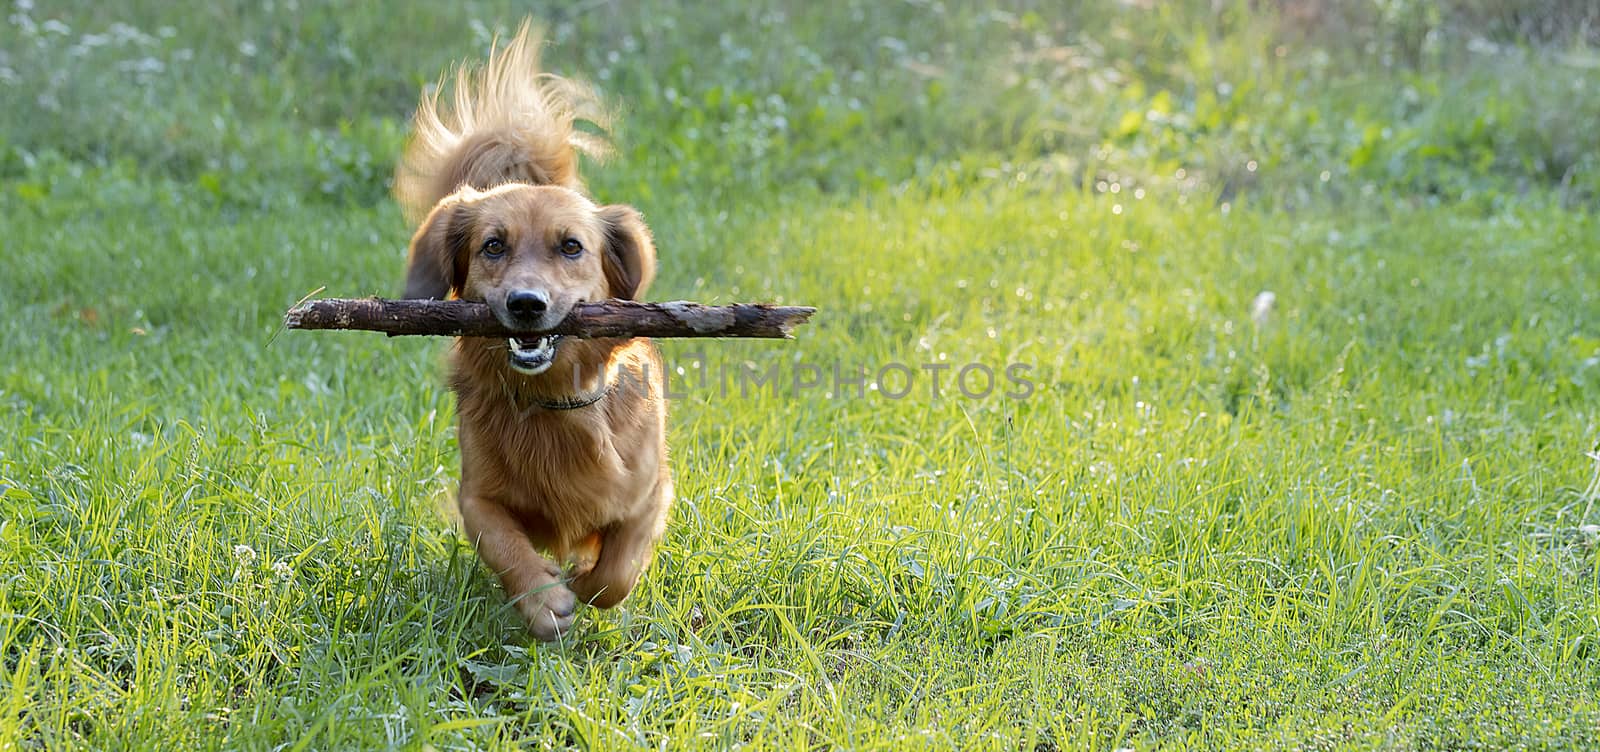 happy dog dachshund playing with a branch outdoors on a green lawn by Sergii